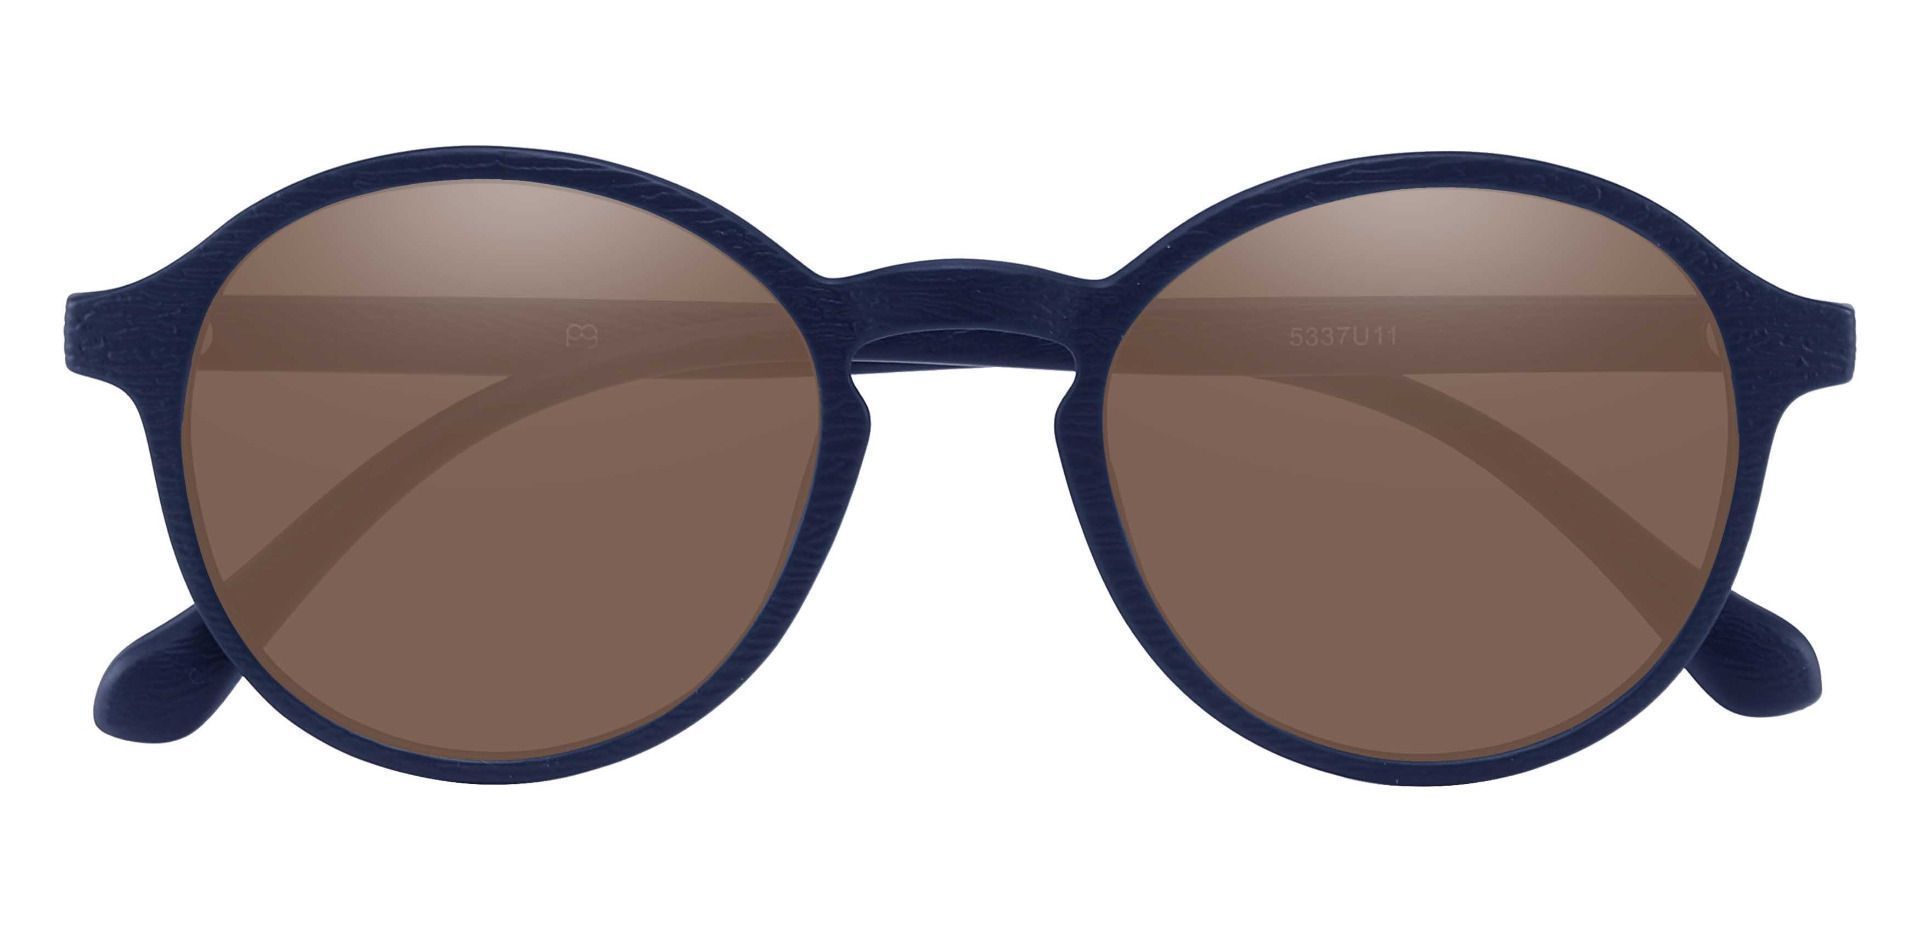 Whitney Round Lined Bifocal Sunglasses - Blue Frame With Brown Lenses